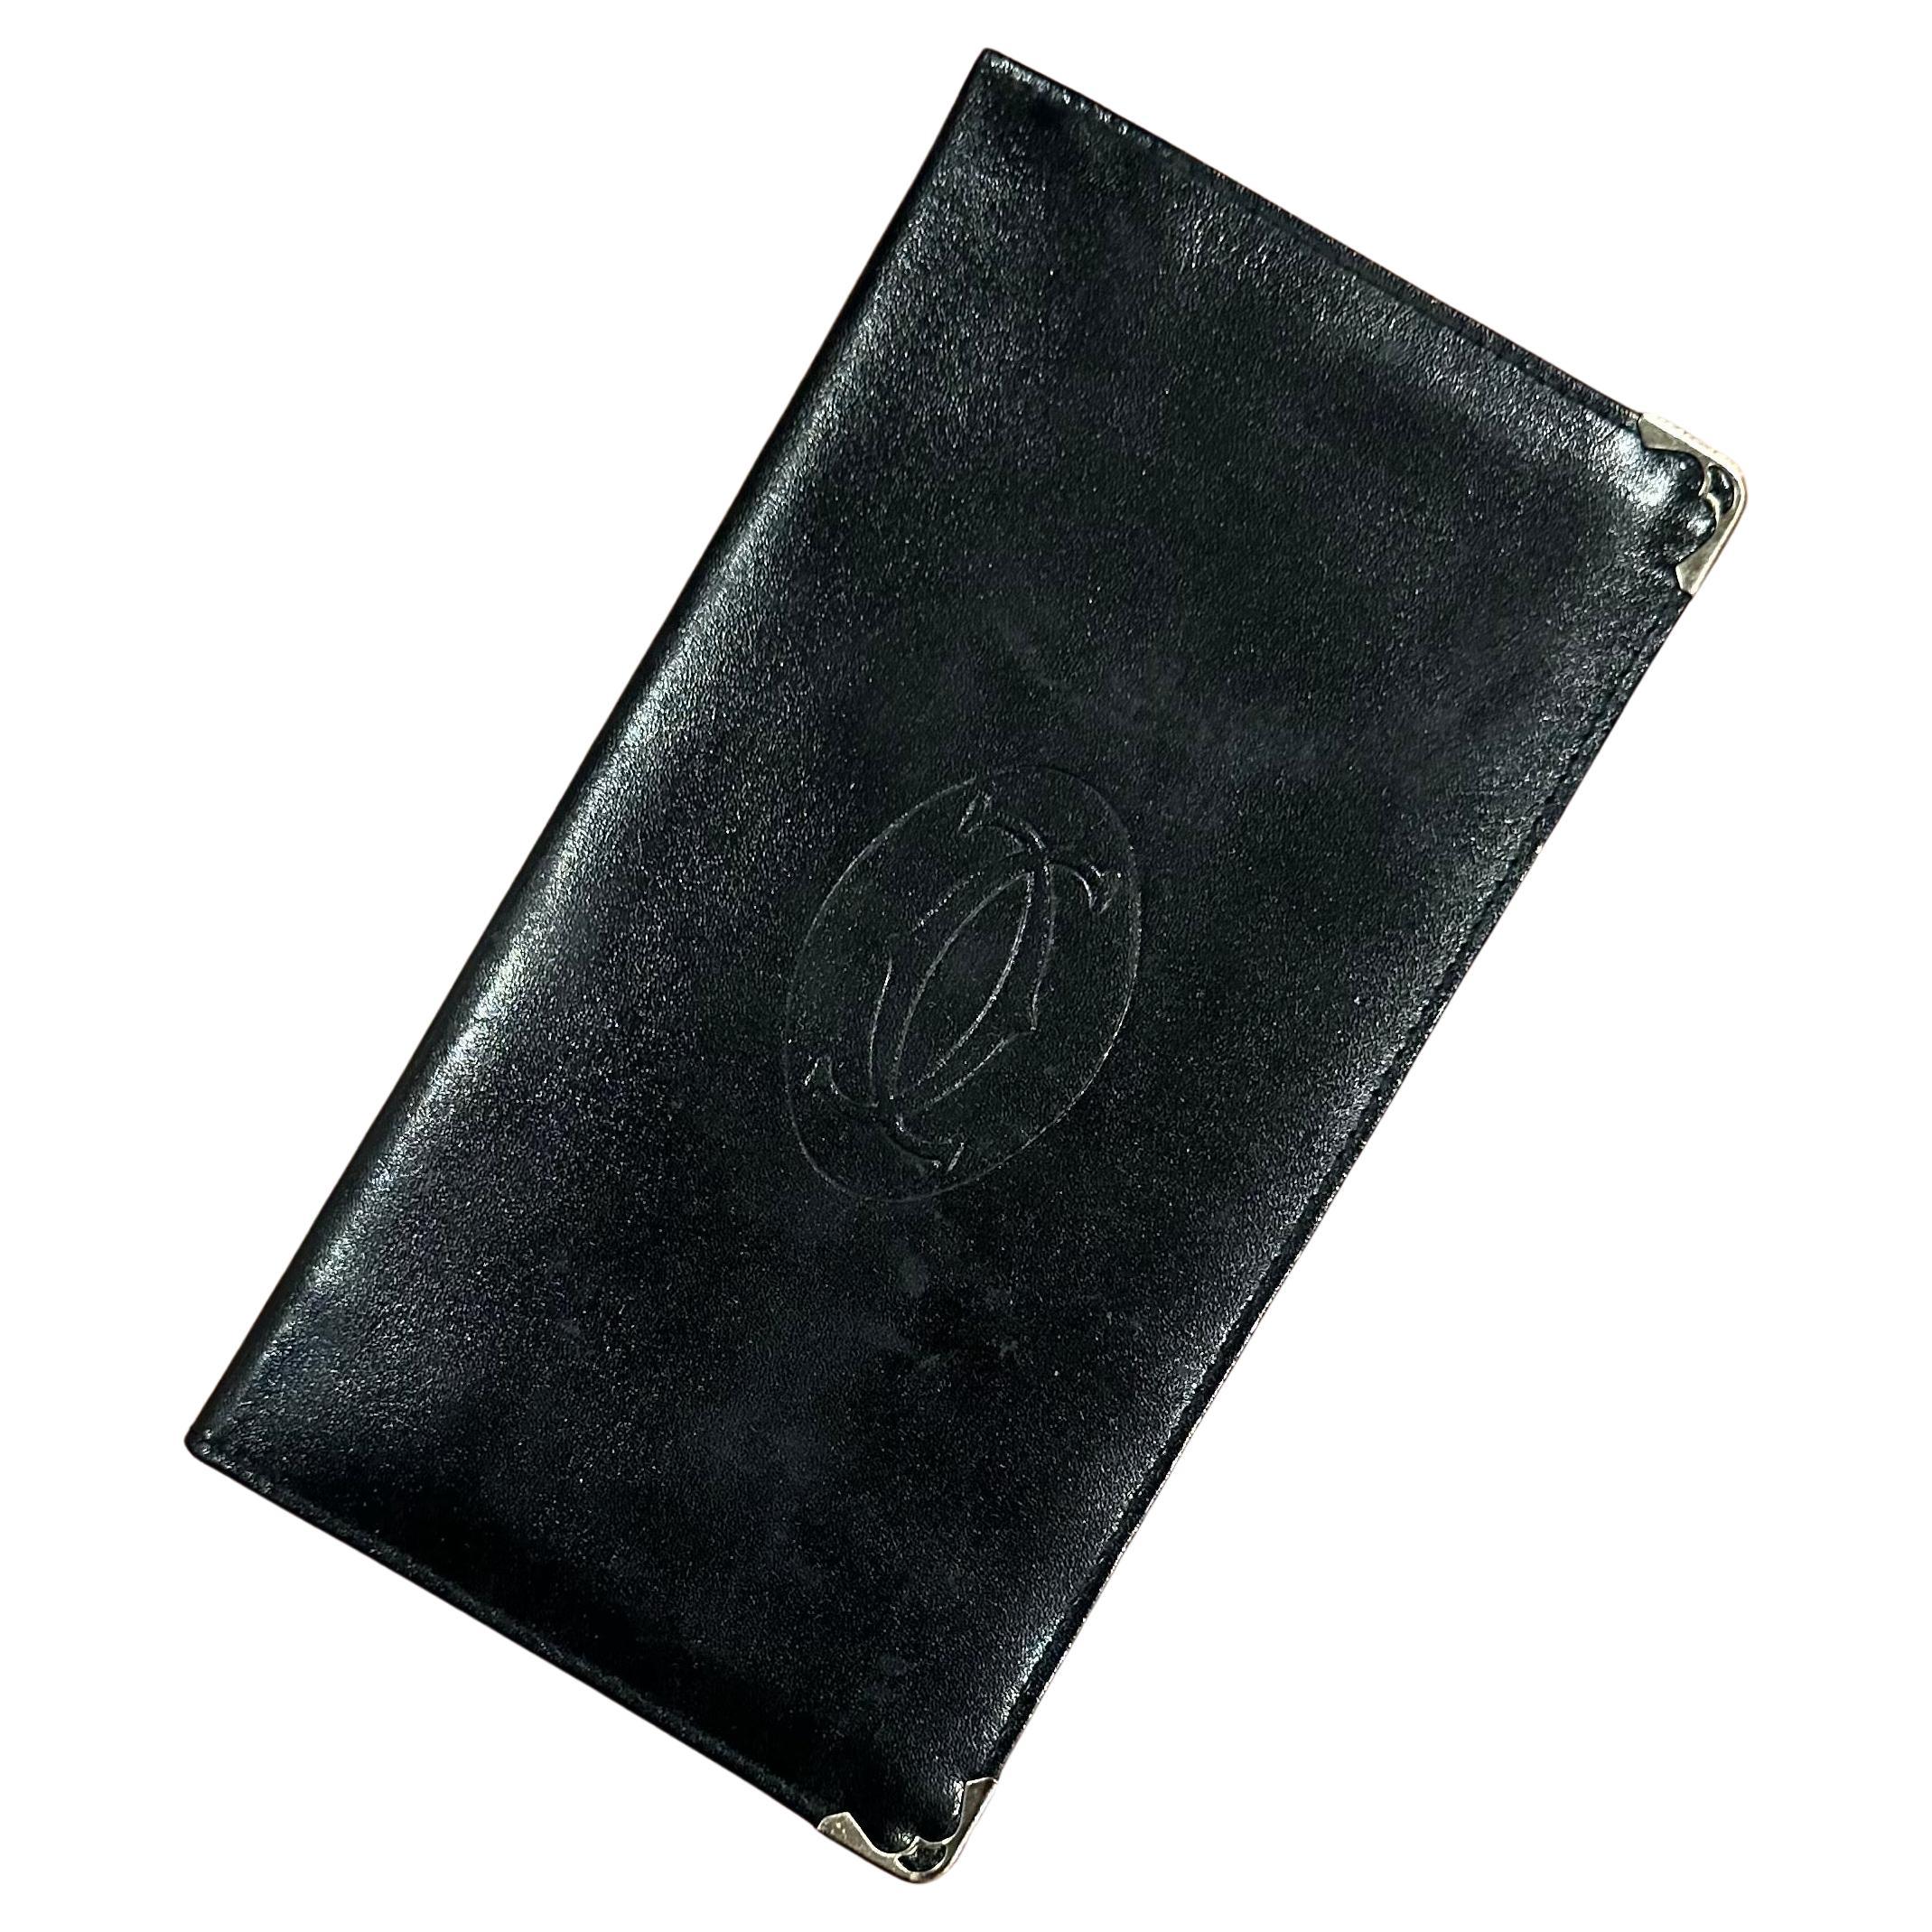 Vintage Black Leather "Logo" Wallet / Checkbook Cover by Cartier